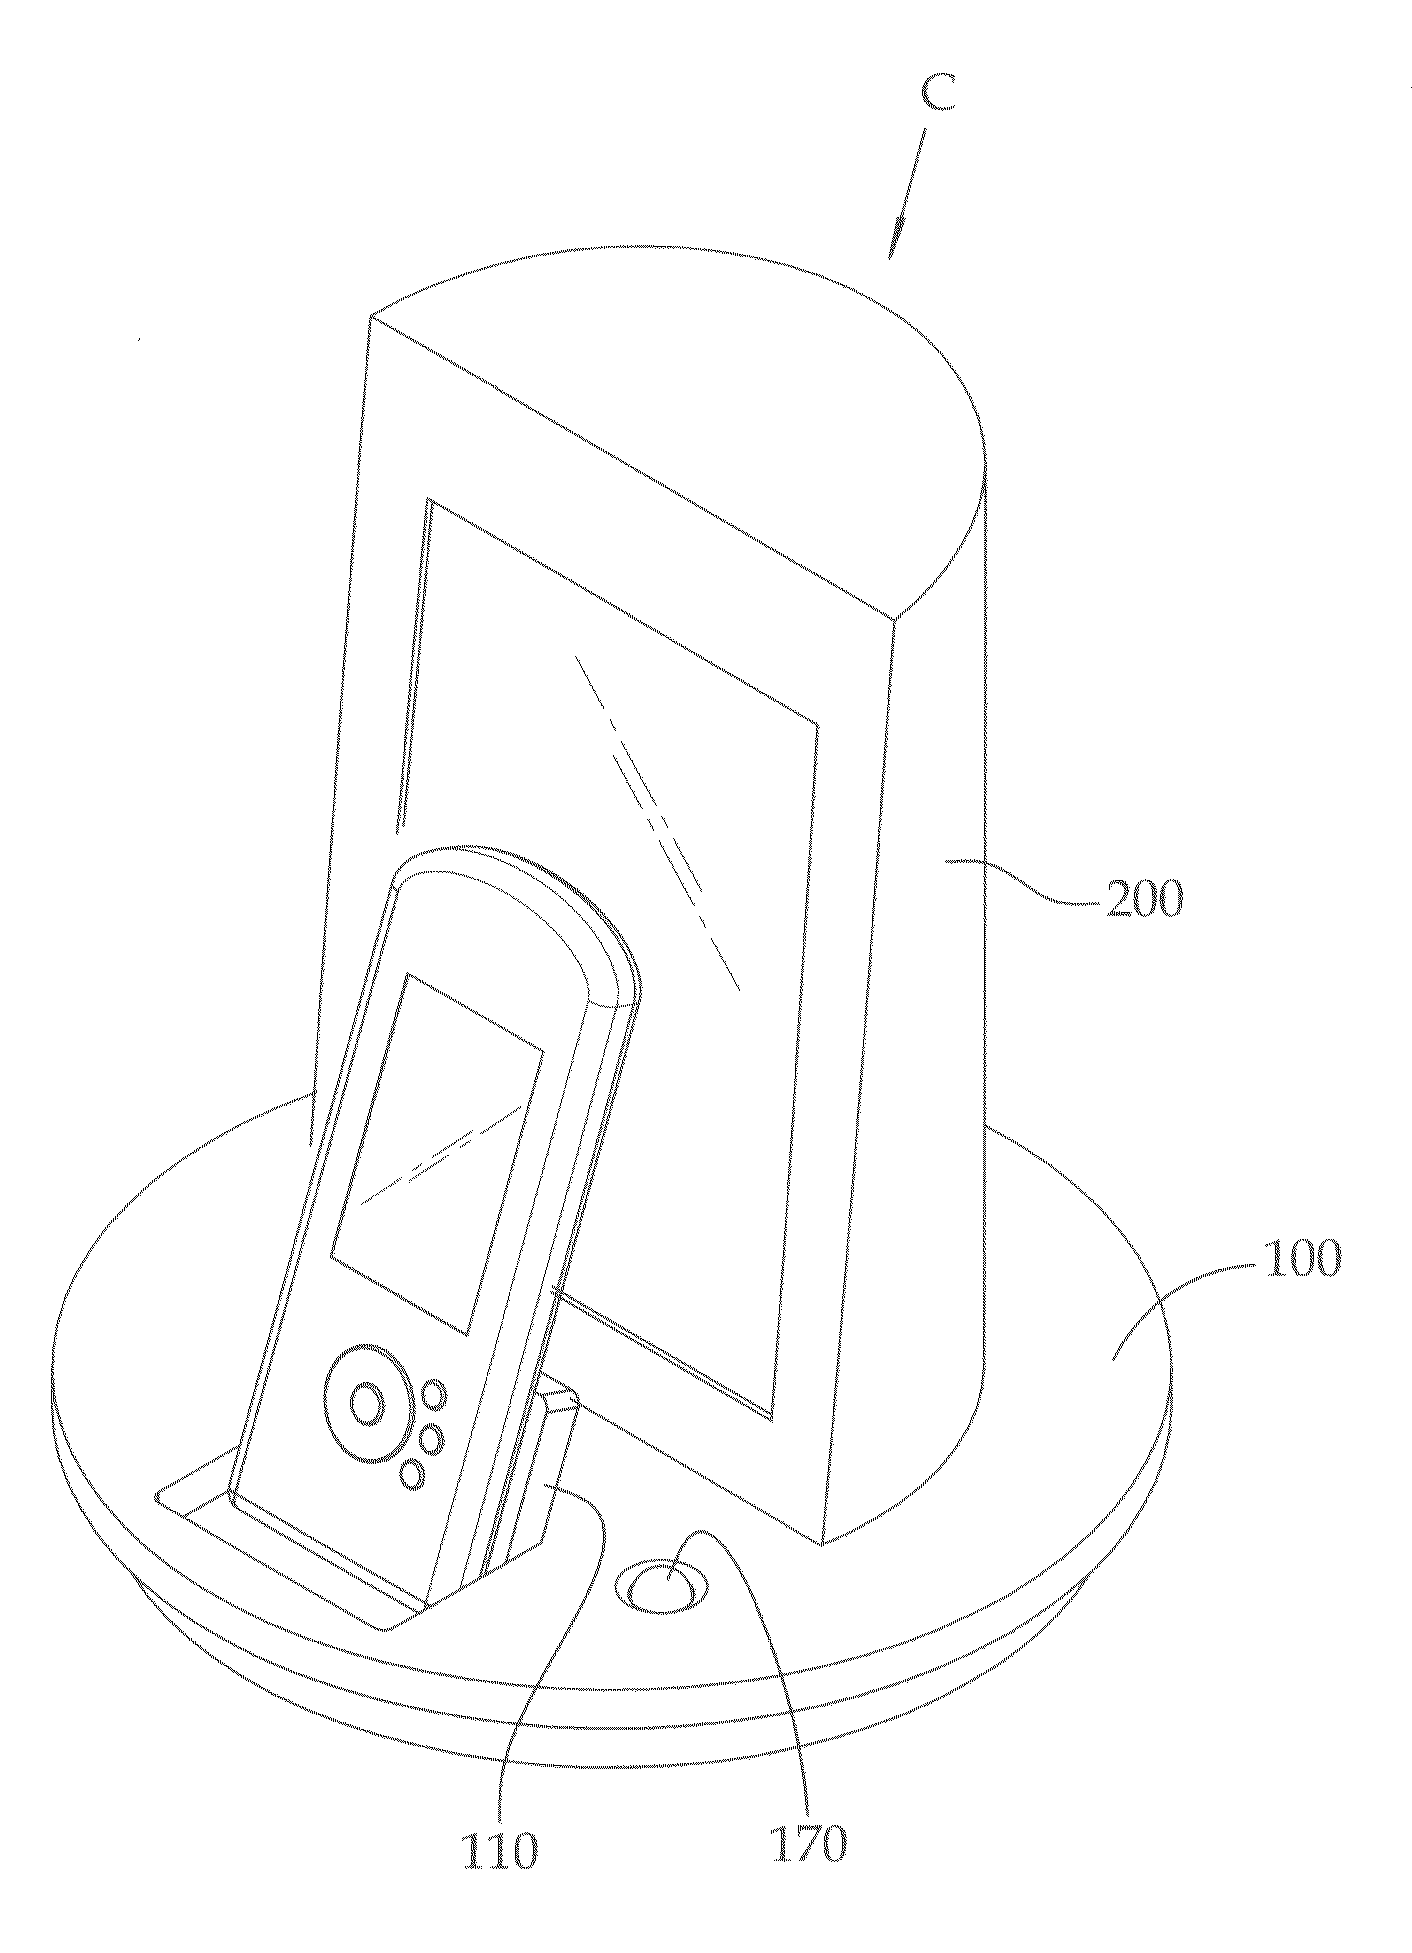 Multifunctional cradle for mobile communication device